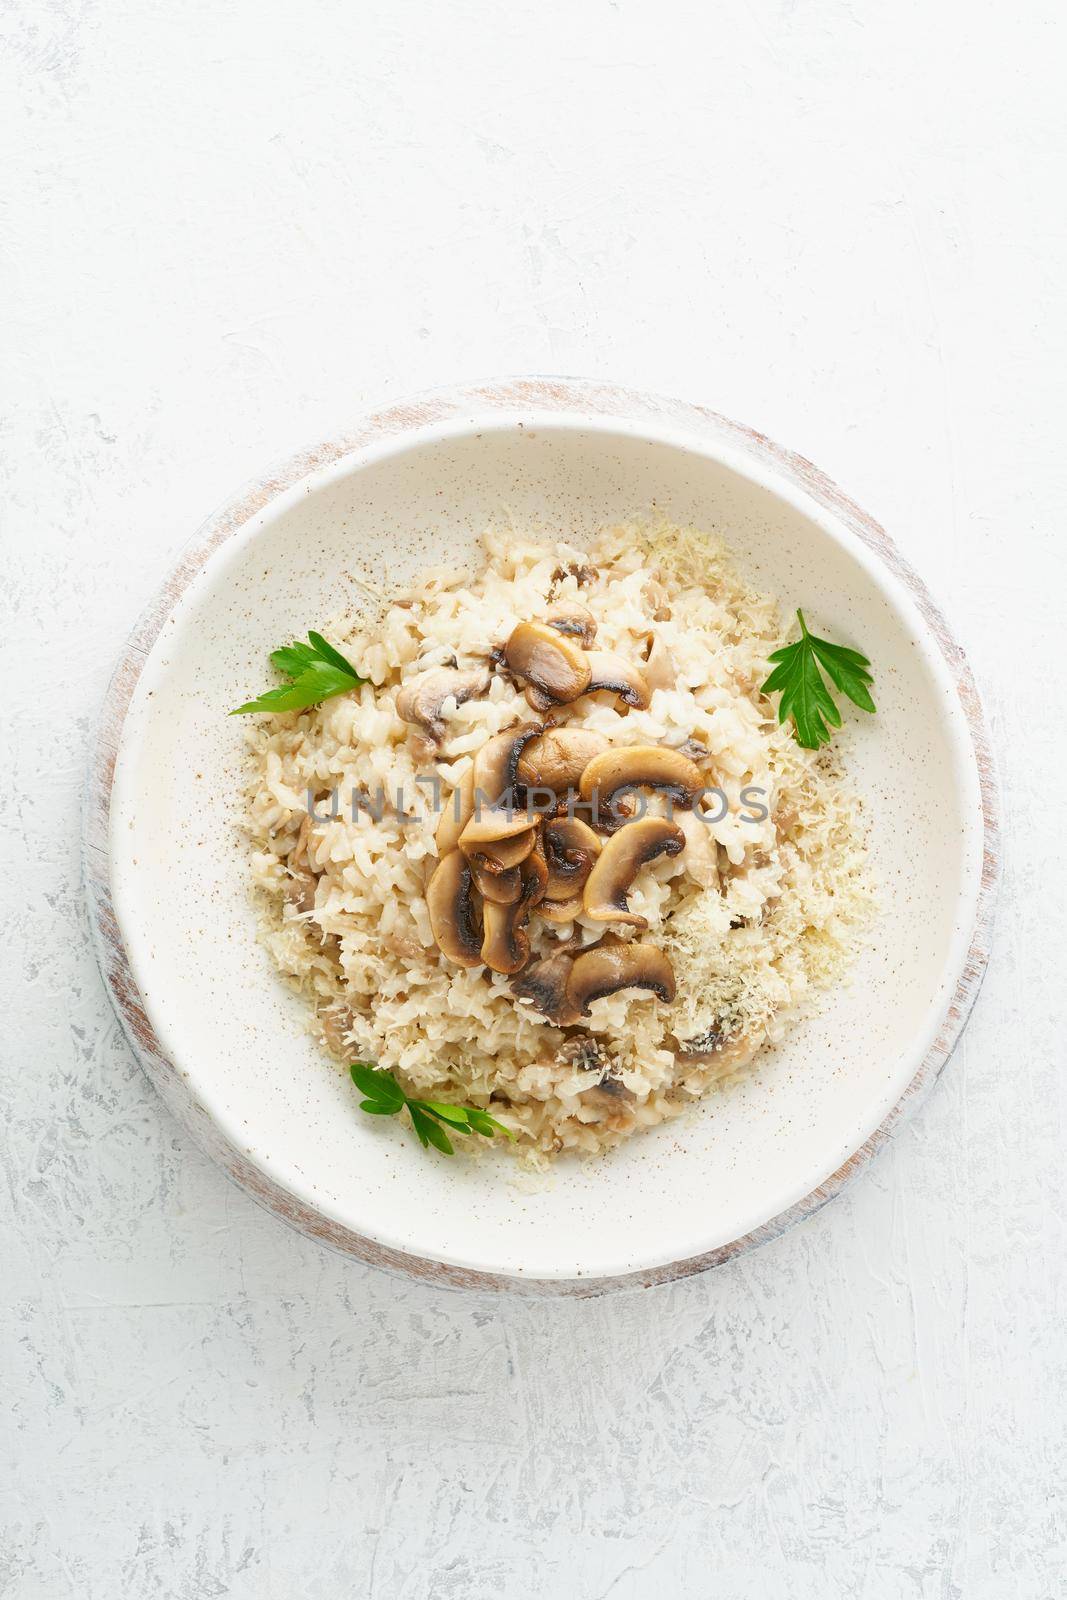 Risotto with mushrooms in plate. Rice porridge with mushrooms and parsley. White table, spoons, mushrooms. Hot dish, italian cuisine, top view, vertical, copy space